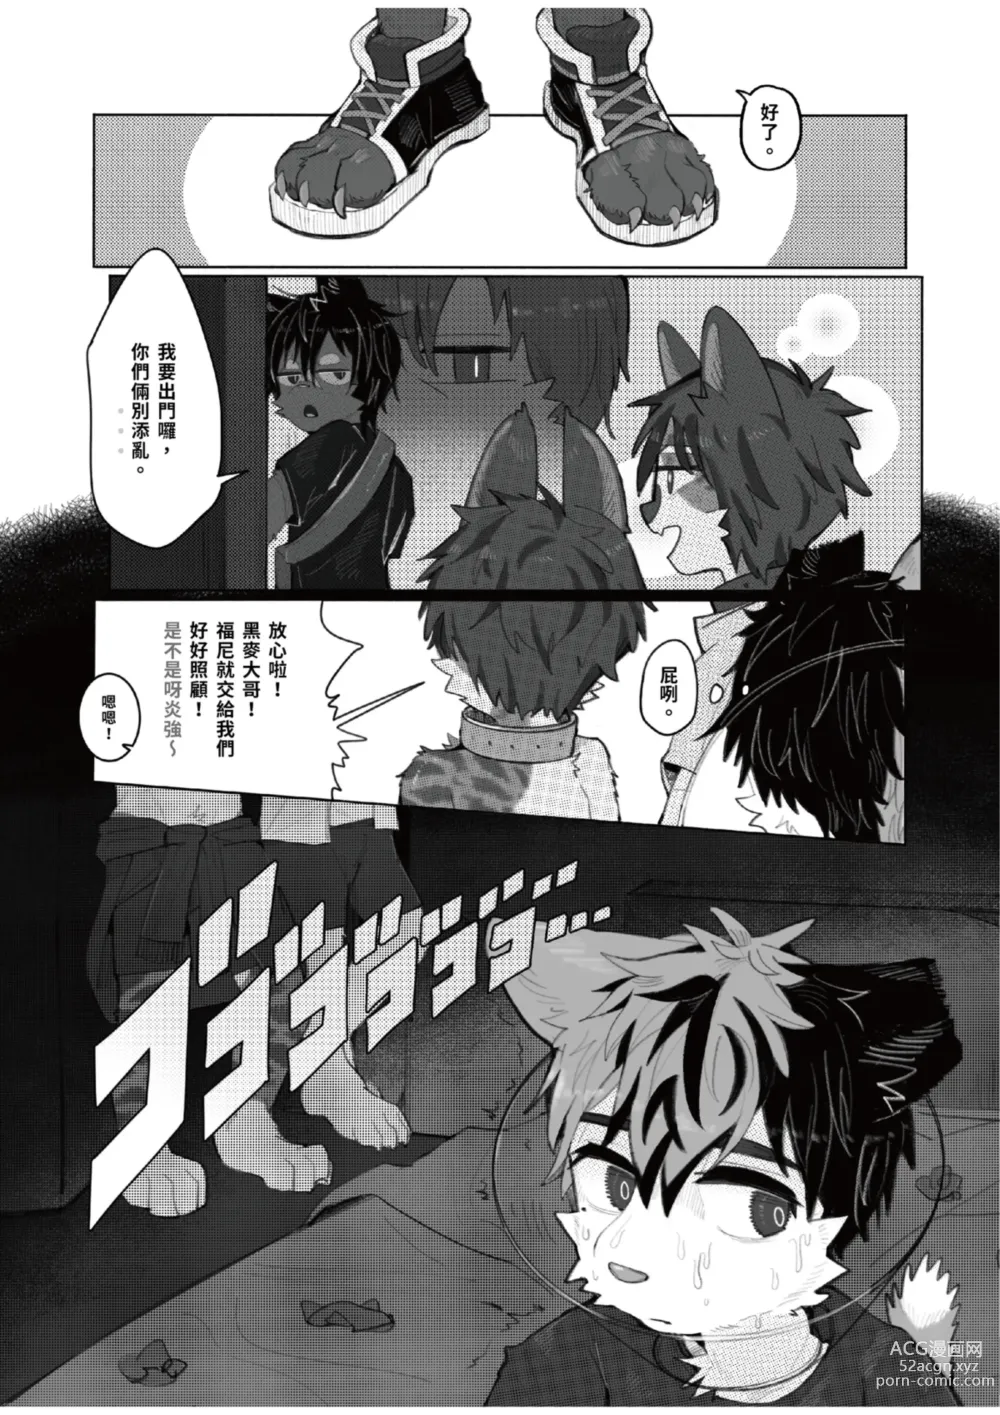 Page 9 of doujinshi 巷弄發浪 Heat Alley